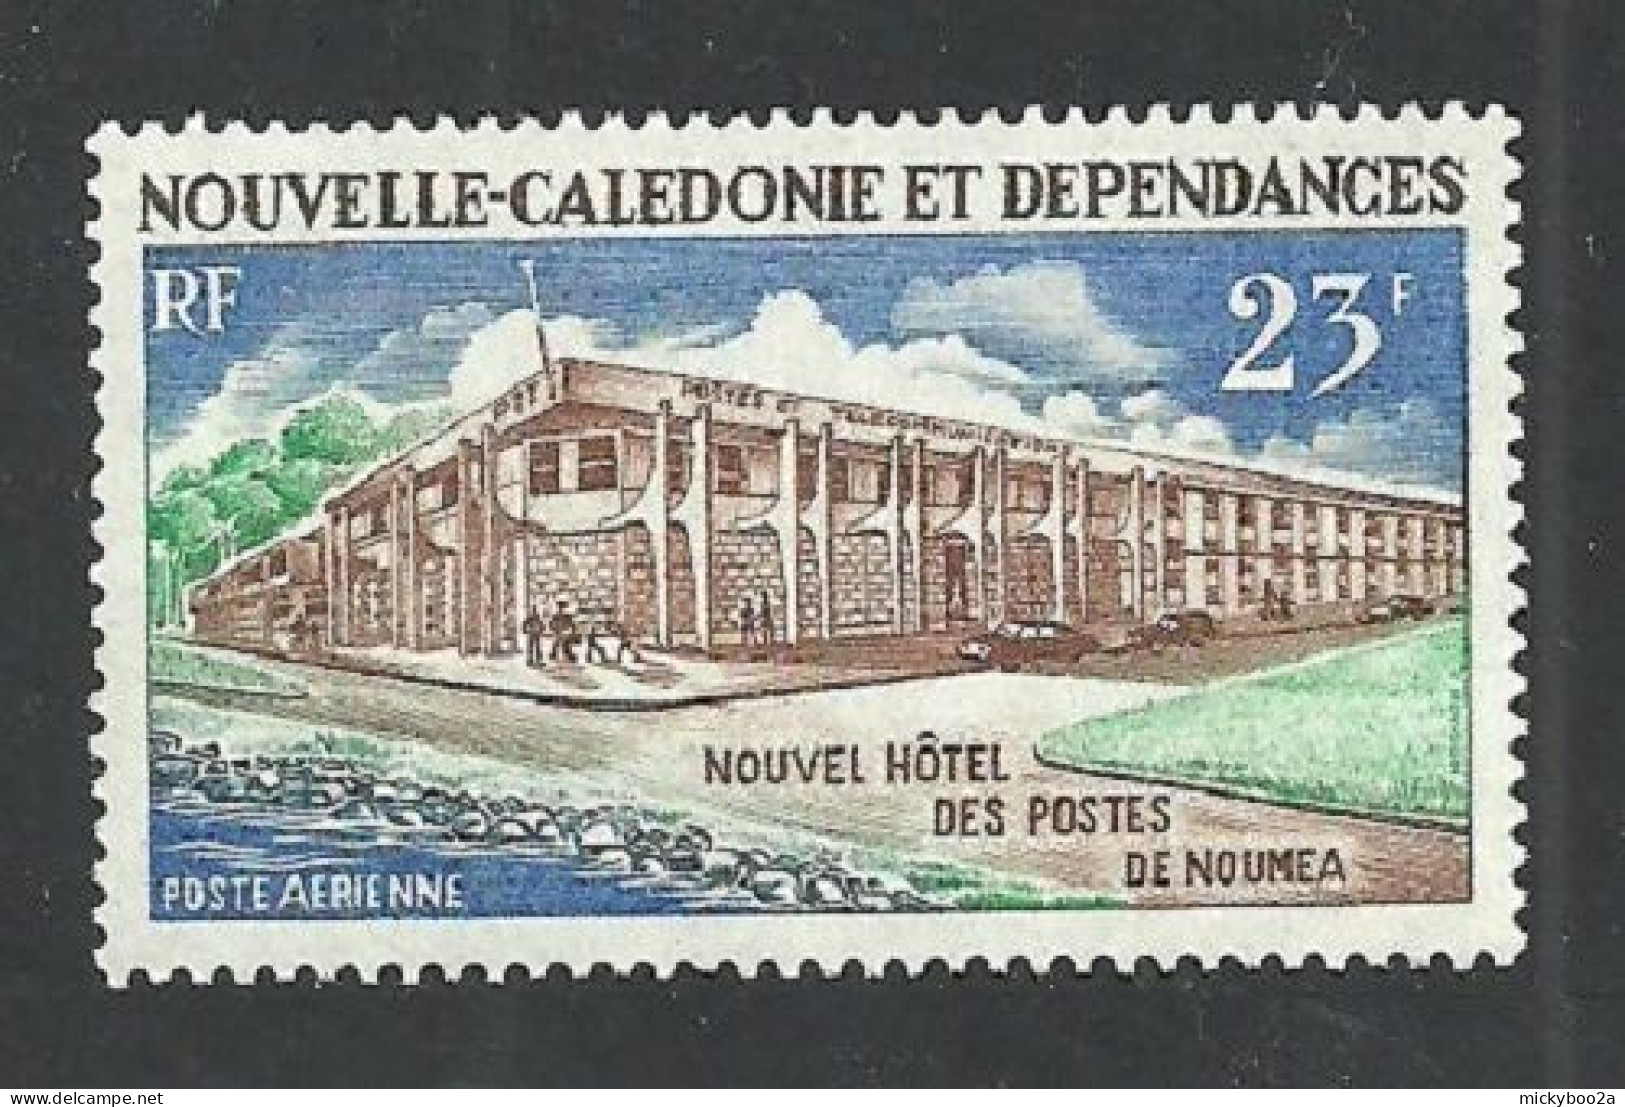 NEW CALEDONIA 1972 POST OFFICE SET MOUNTED MINT - Gebraucht